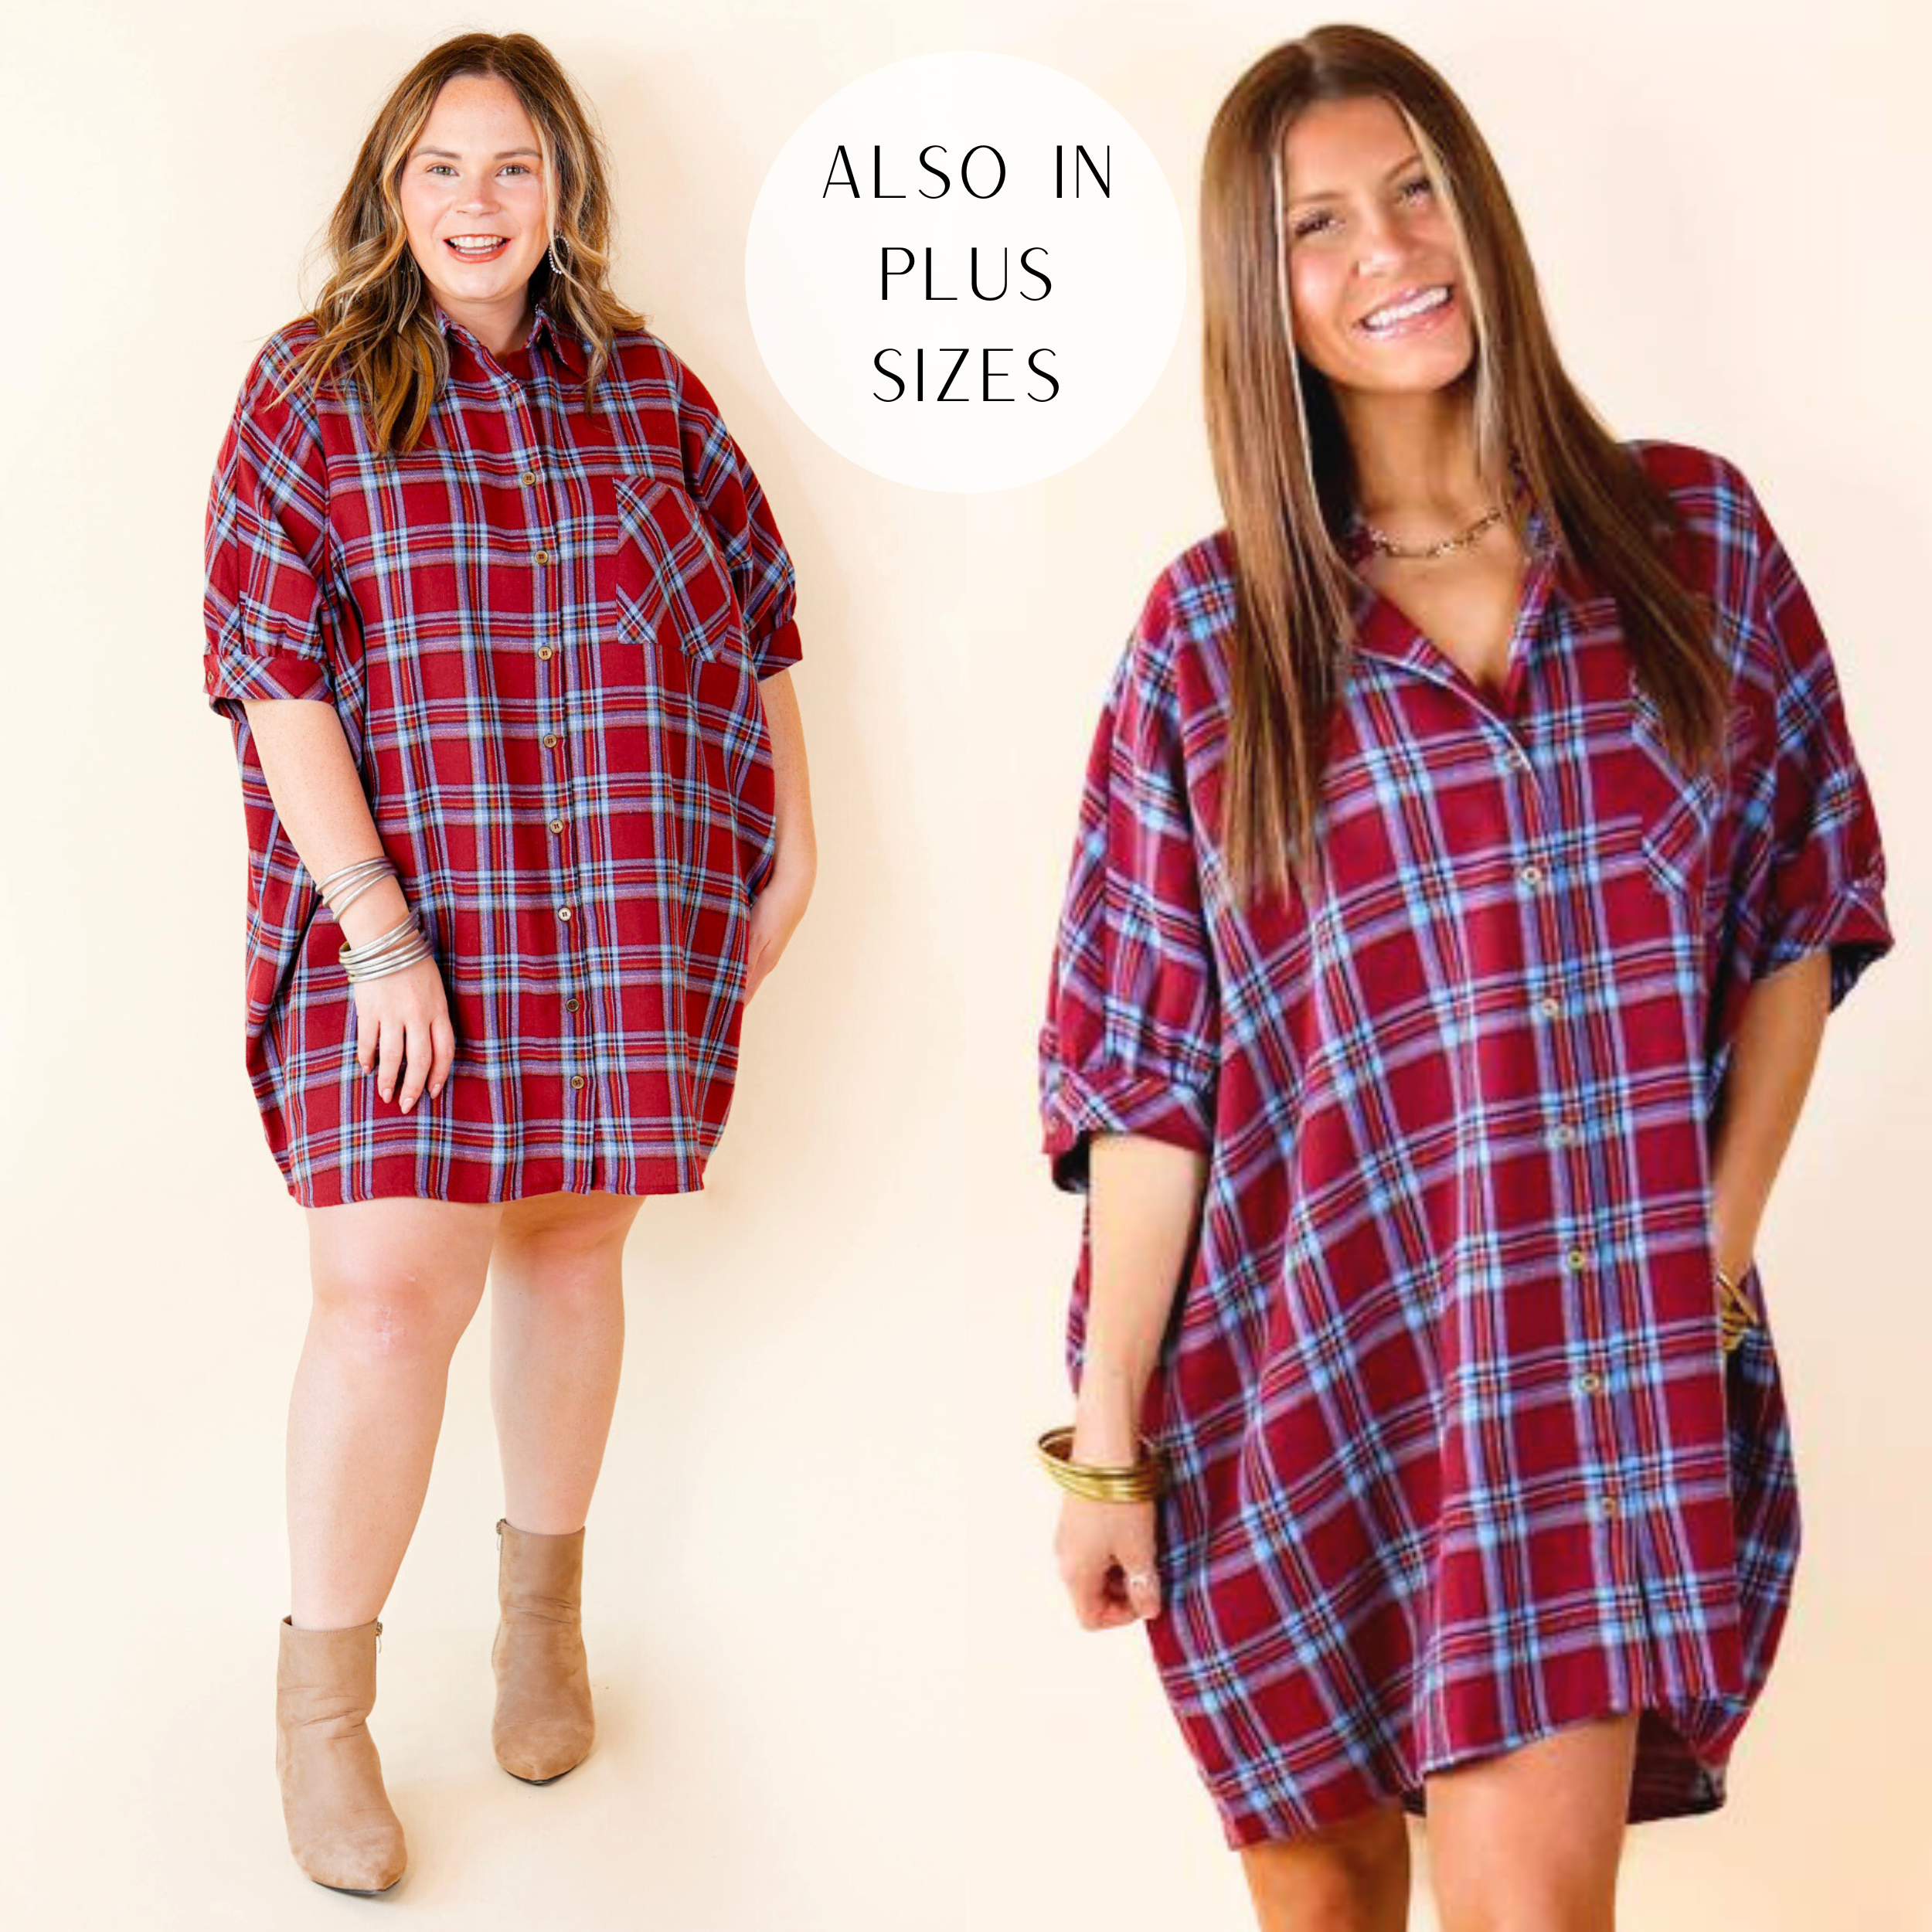 Model is wearing a plaid button up dress with a collared neckline and short sleeves. Model has it paired with white boots and gold jewelry.